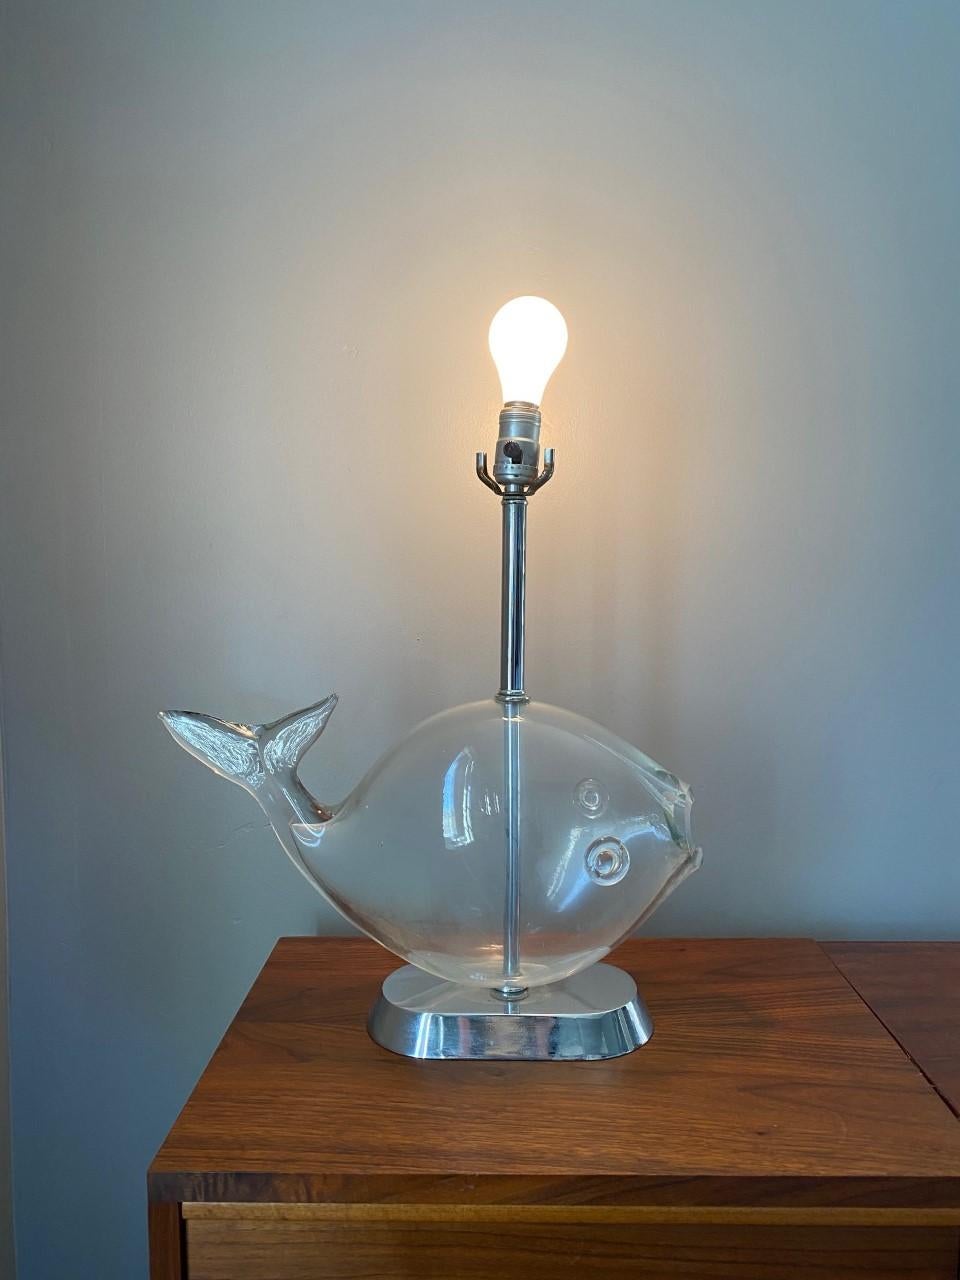 Midcentury glass fish lamp by Blenko, circa 1960s. The lamp is handblown clear glass fish mounted on a chrome base with a chrome stem. The lamp is in very good vintage working condition with no chips or cracks. A couple of hard to see flea bites